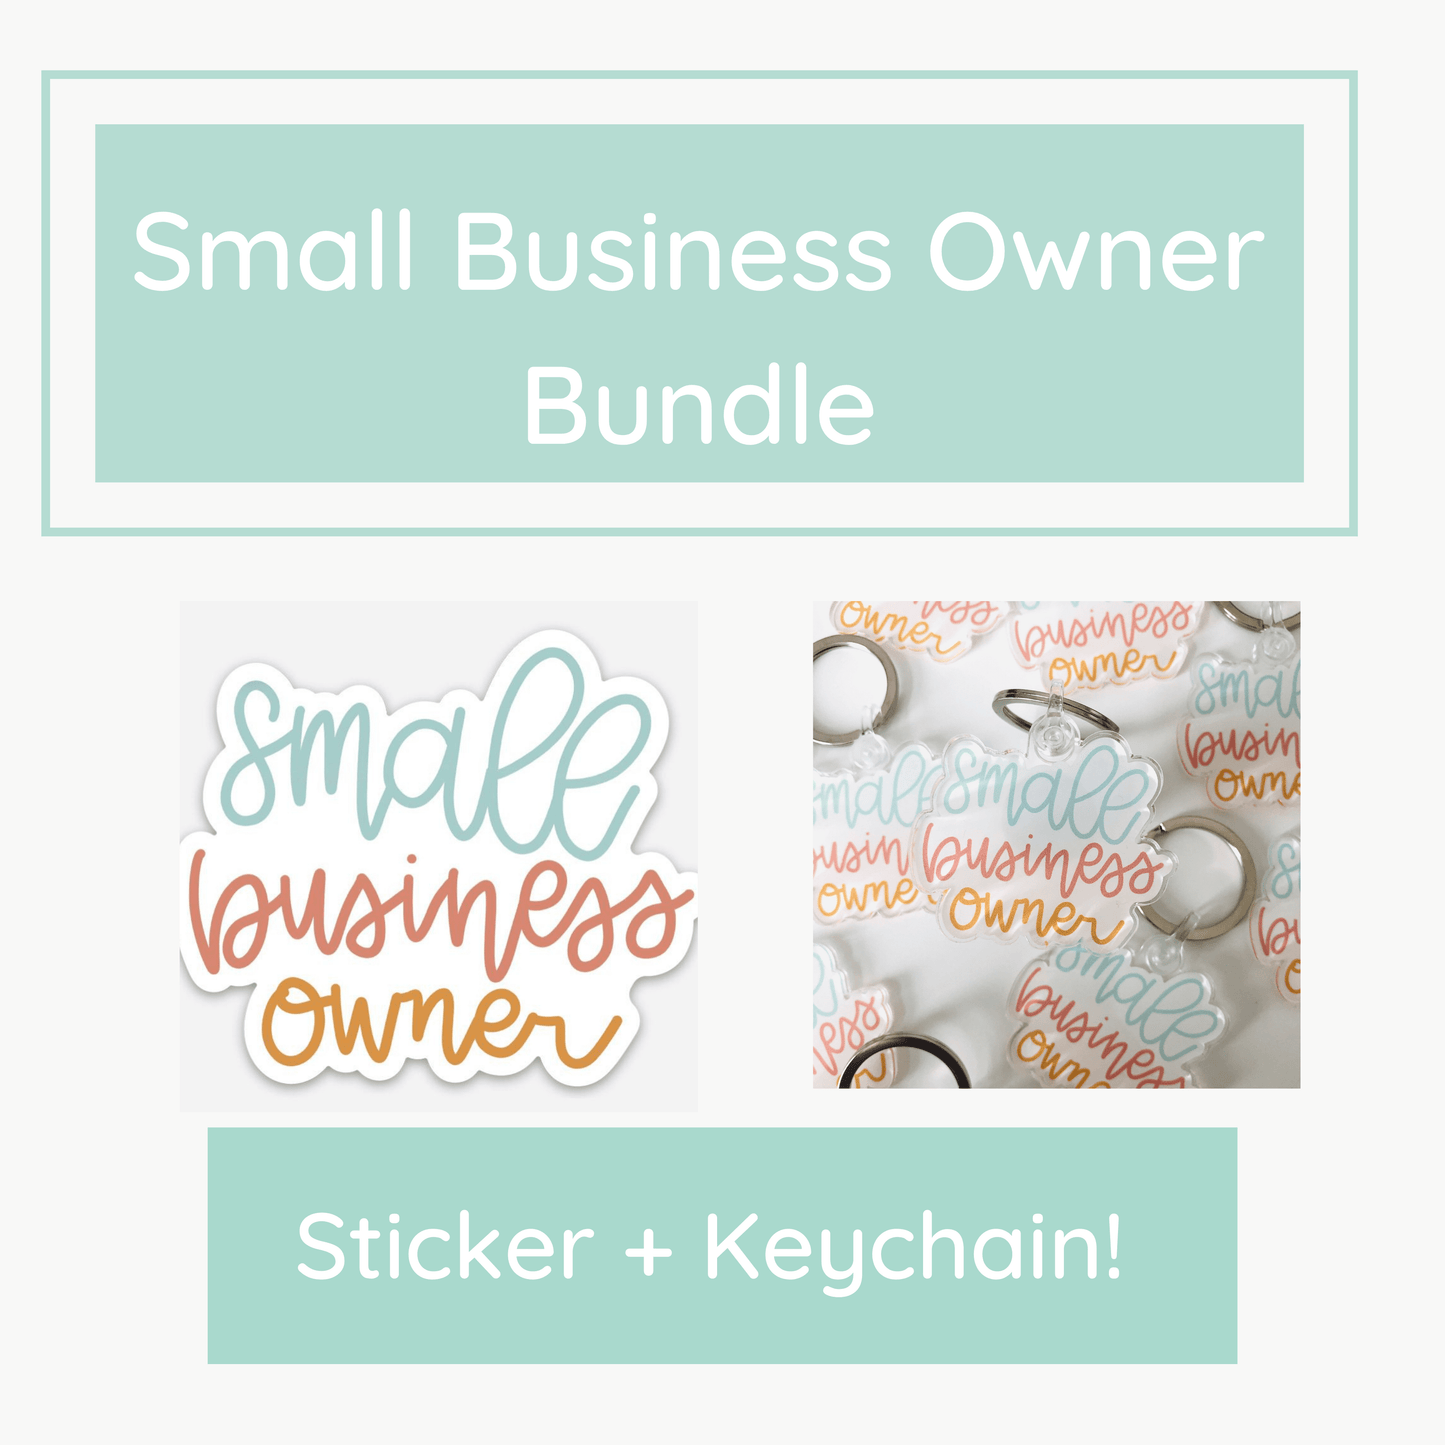 Small Business Owner Bundle - Good Apparel